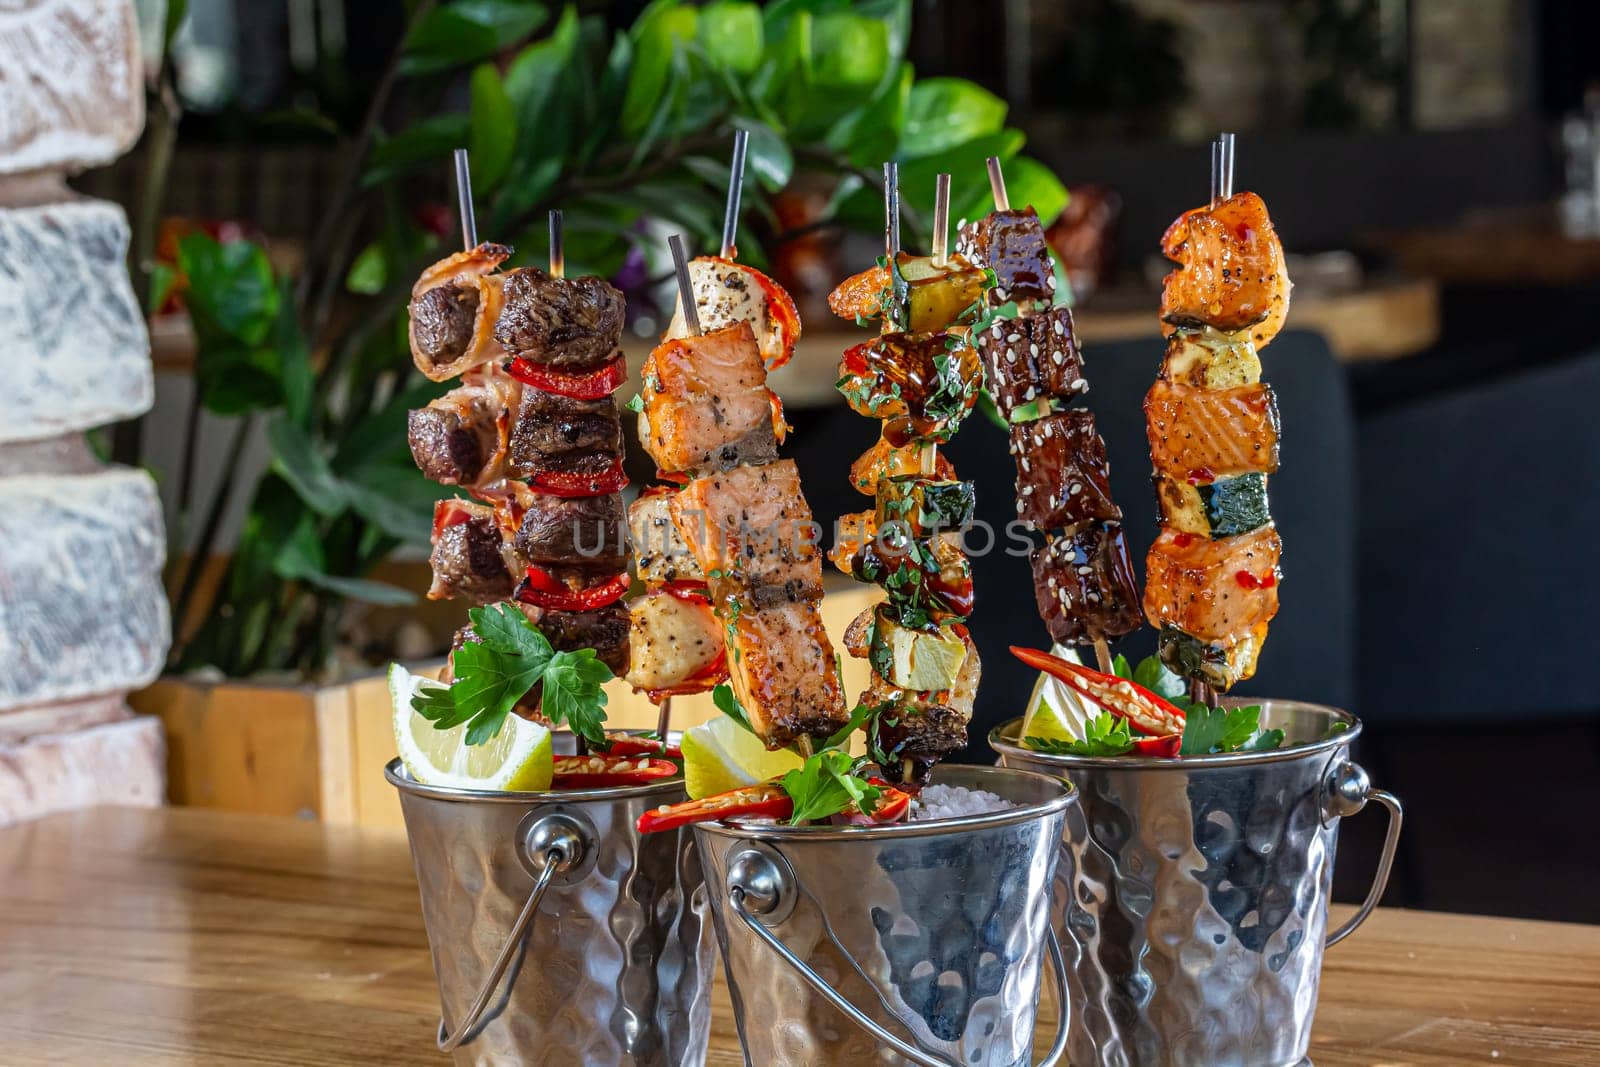 A lot of mini-kebabs of meat, fish, chicken, shrimp, vegetables on wooden skewers by Milanchikov